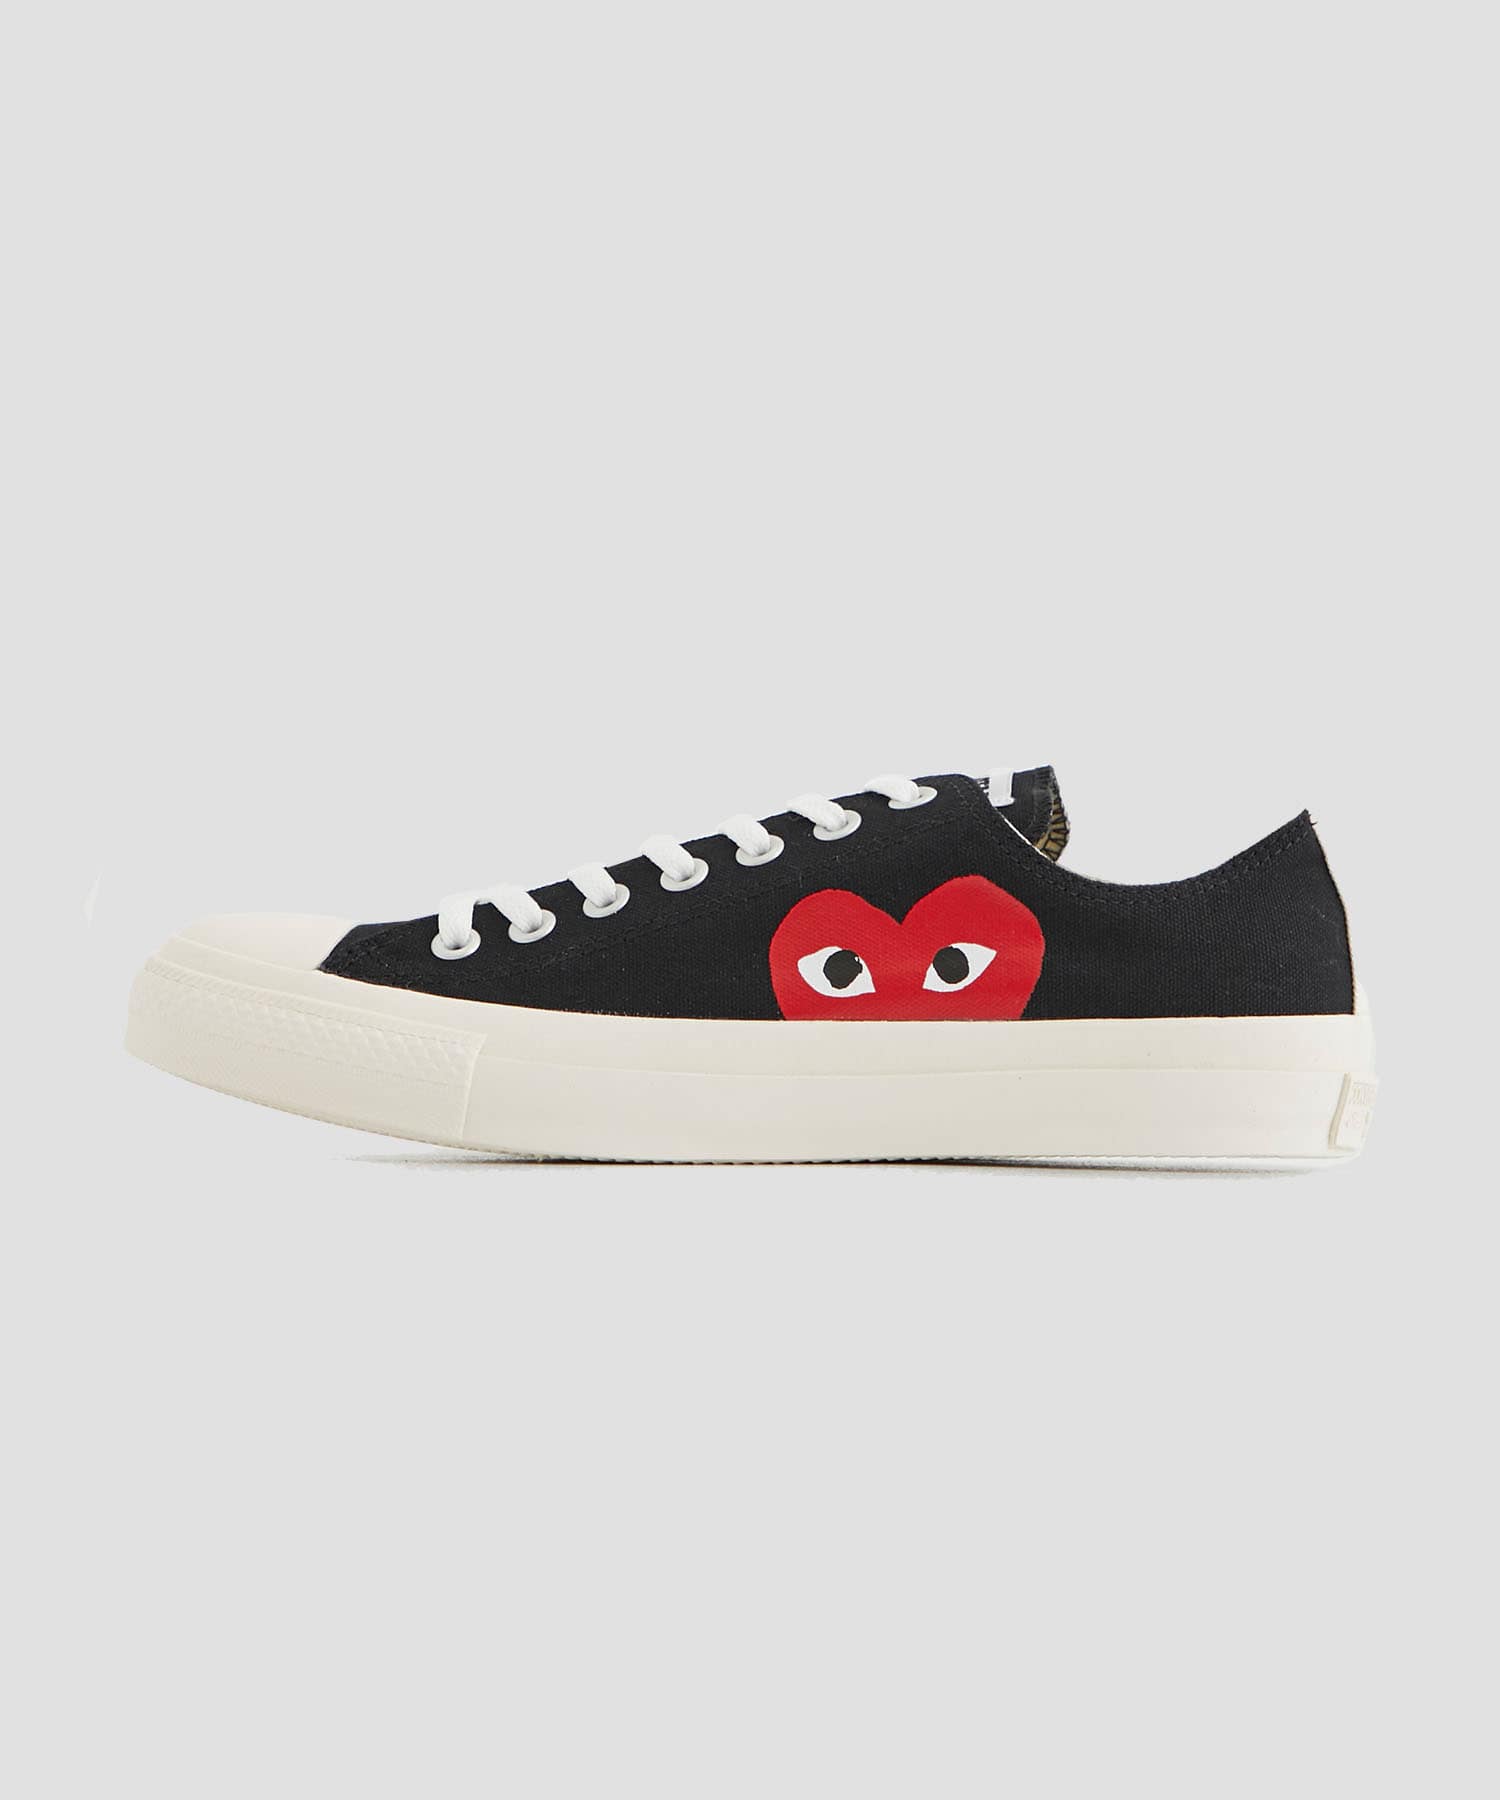 PLAY CONVERSE CHUCK TAYLOR Allstar Low(23 BLACK): PLAY Comme des